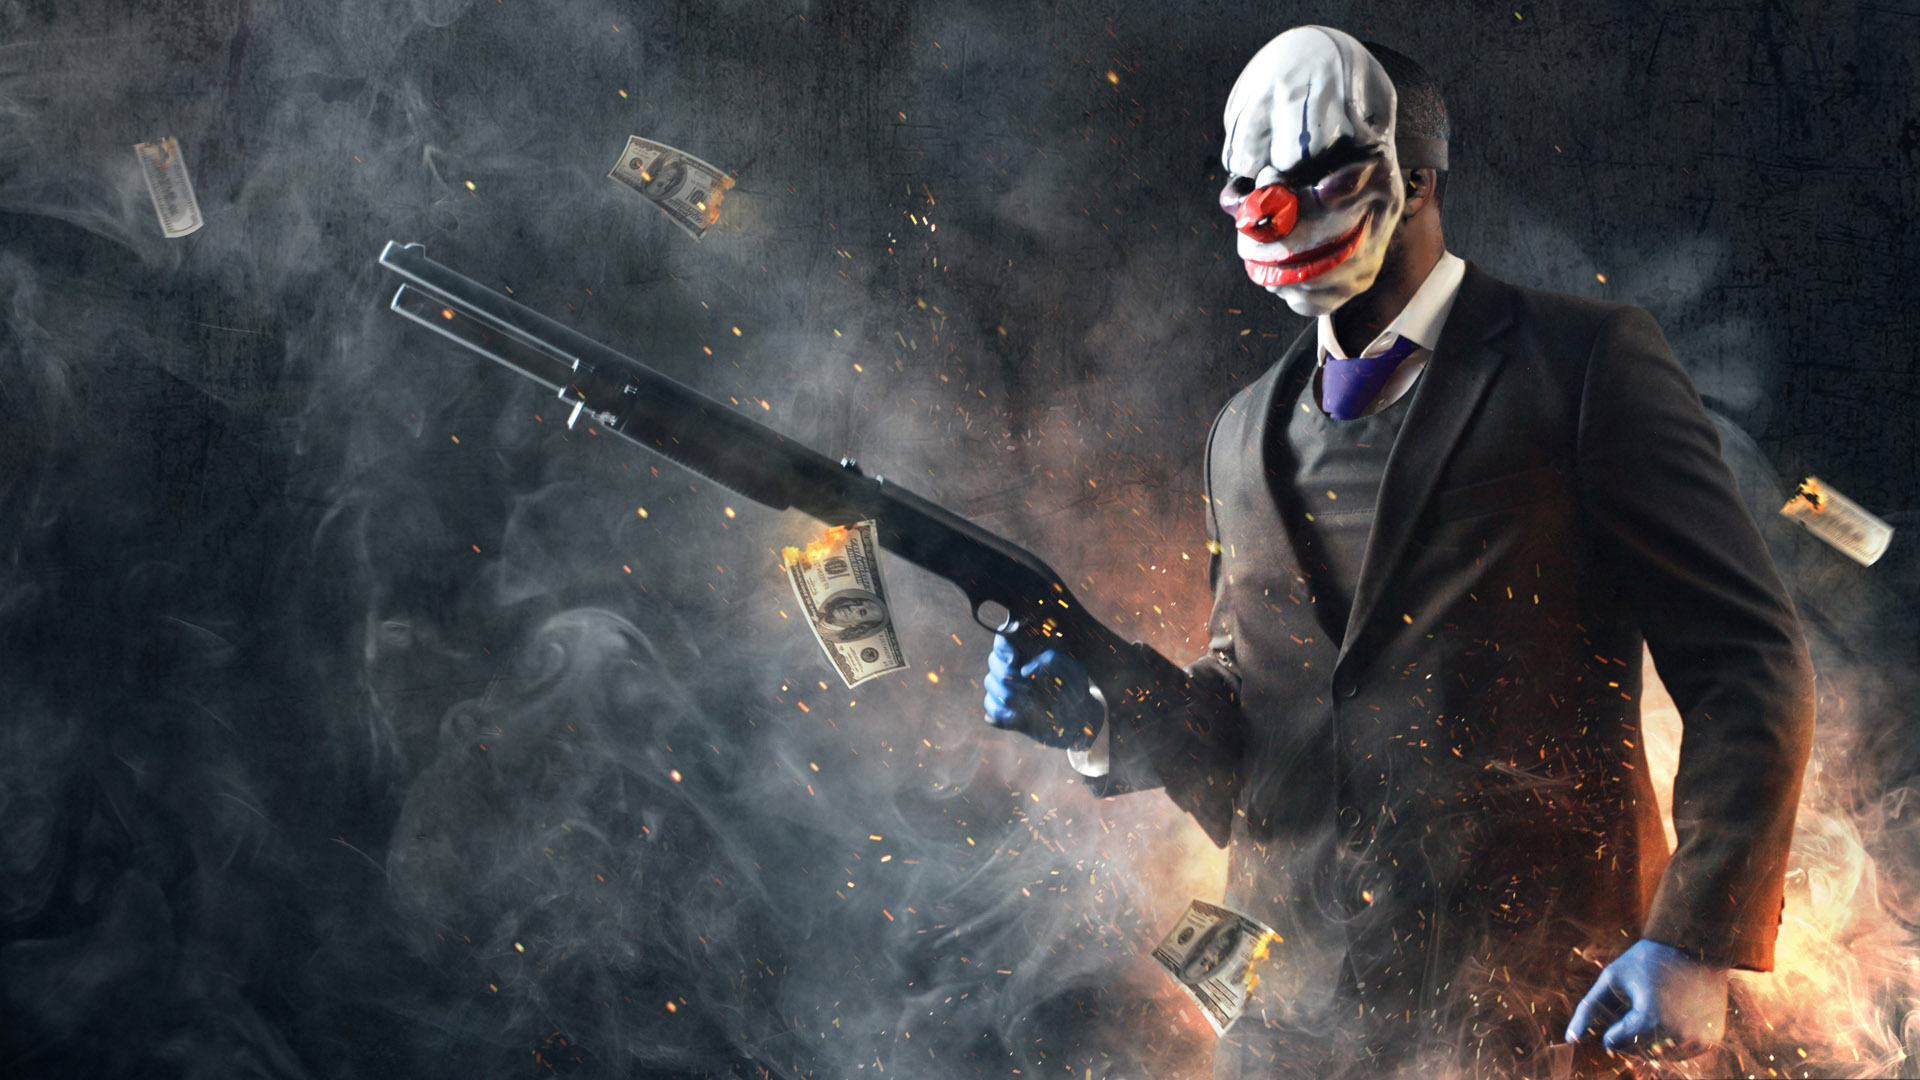 Payday 2 Backgrounds, Compatible - PC, Mobile, Gadgets| 1920x1080 px